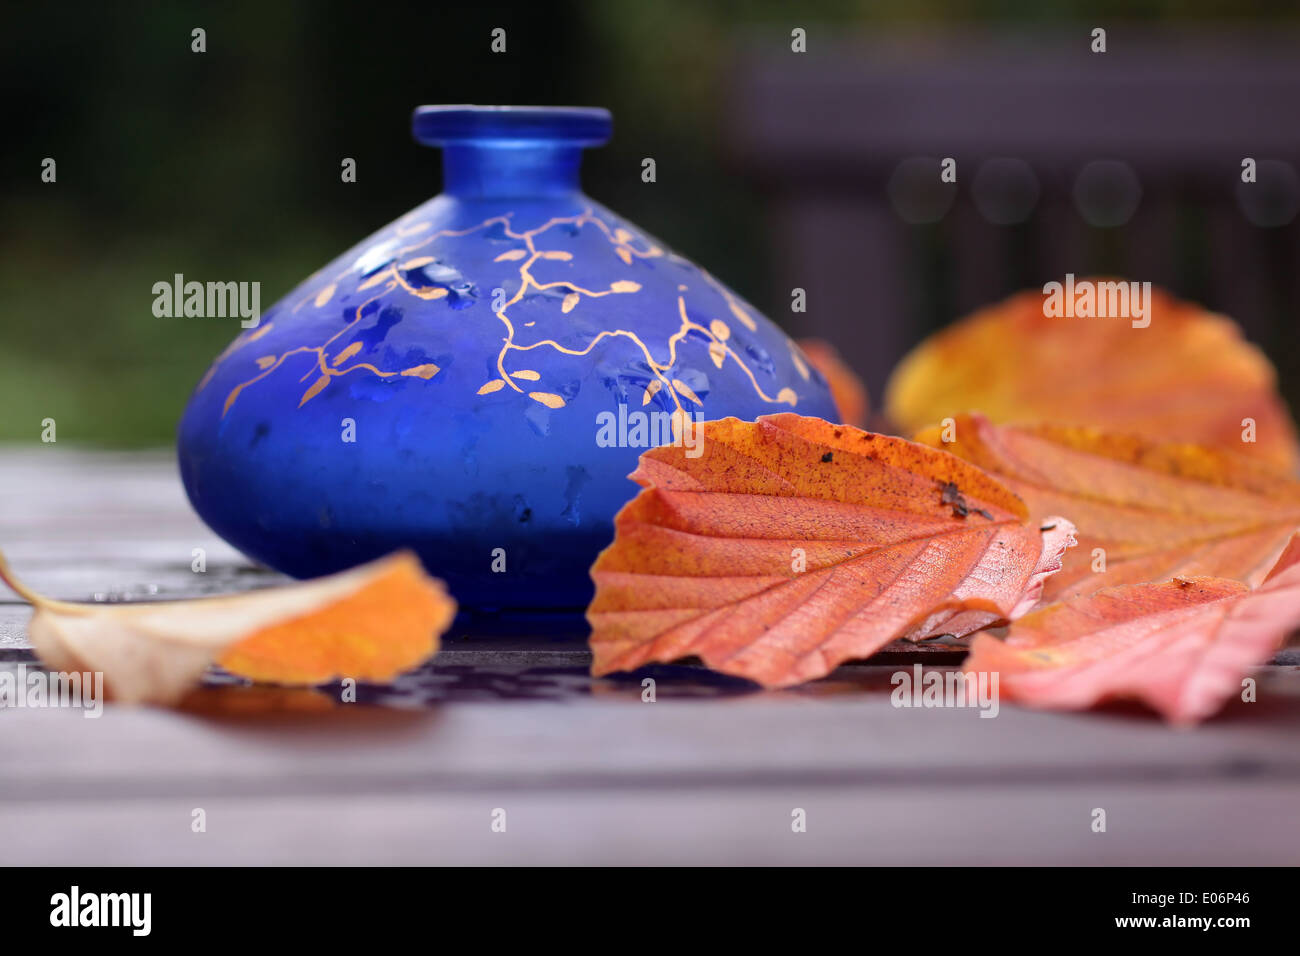 Blue Vase with Autumn decoration on a wooden table Stock Photo